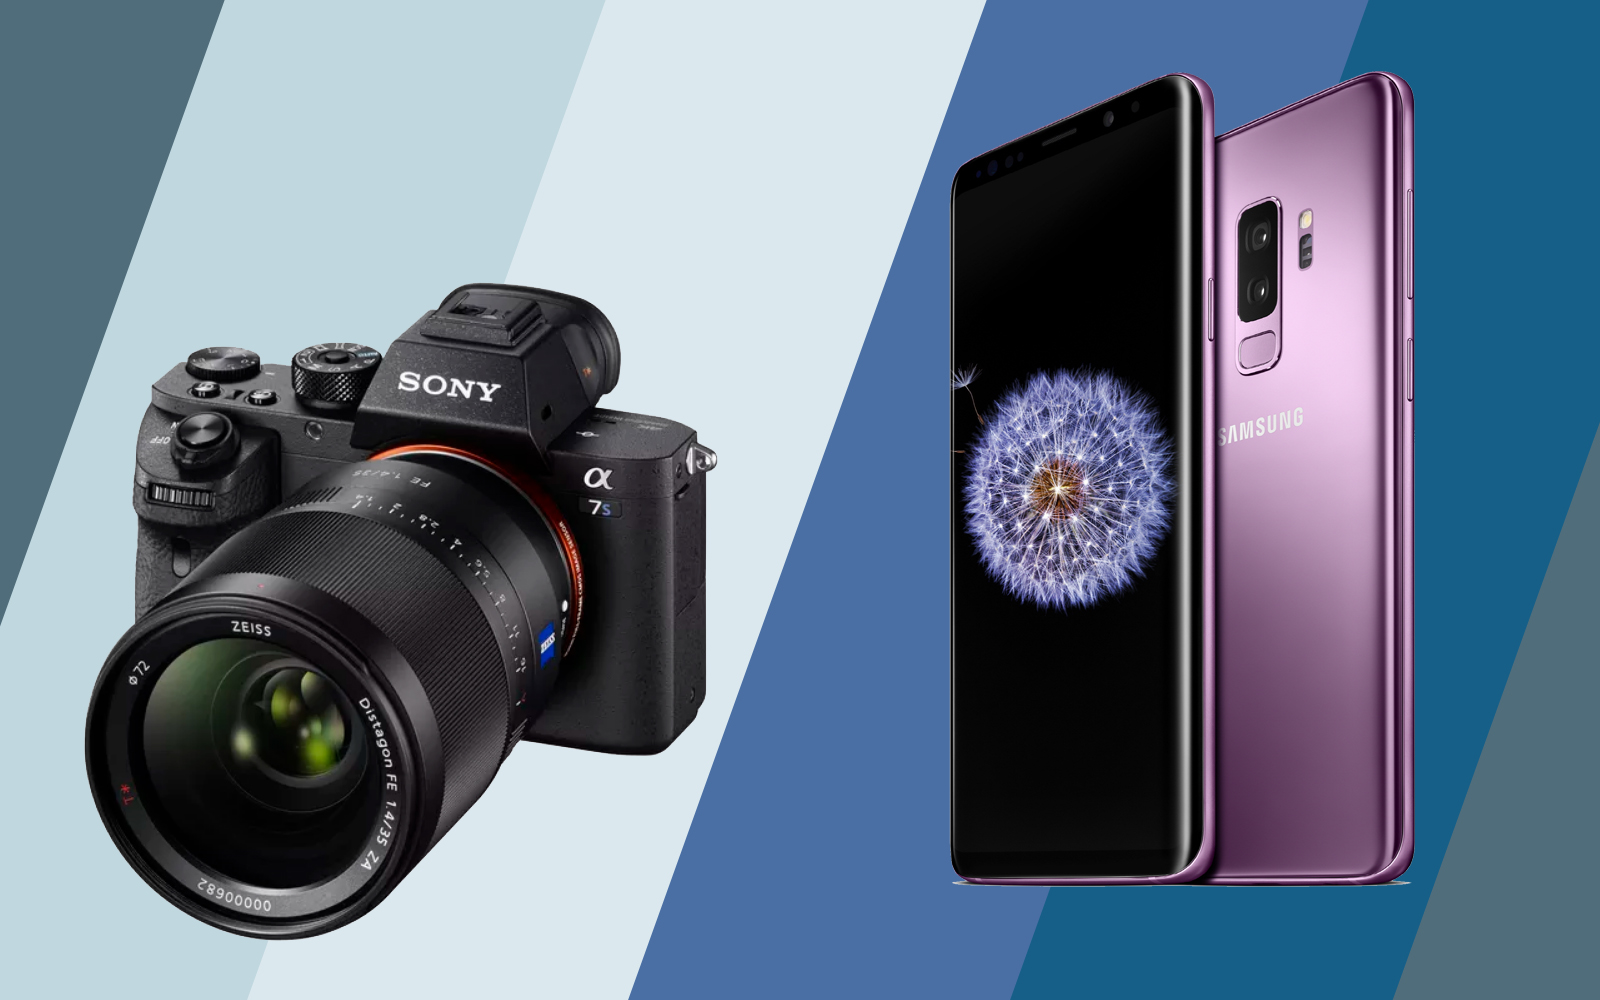 The Best Camera Apps for Android - March 2018